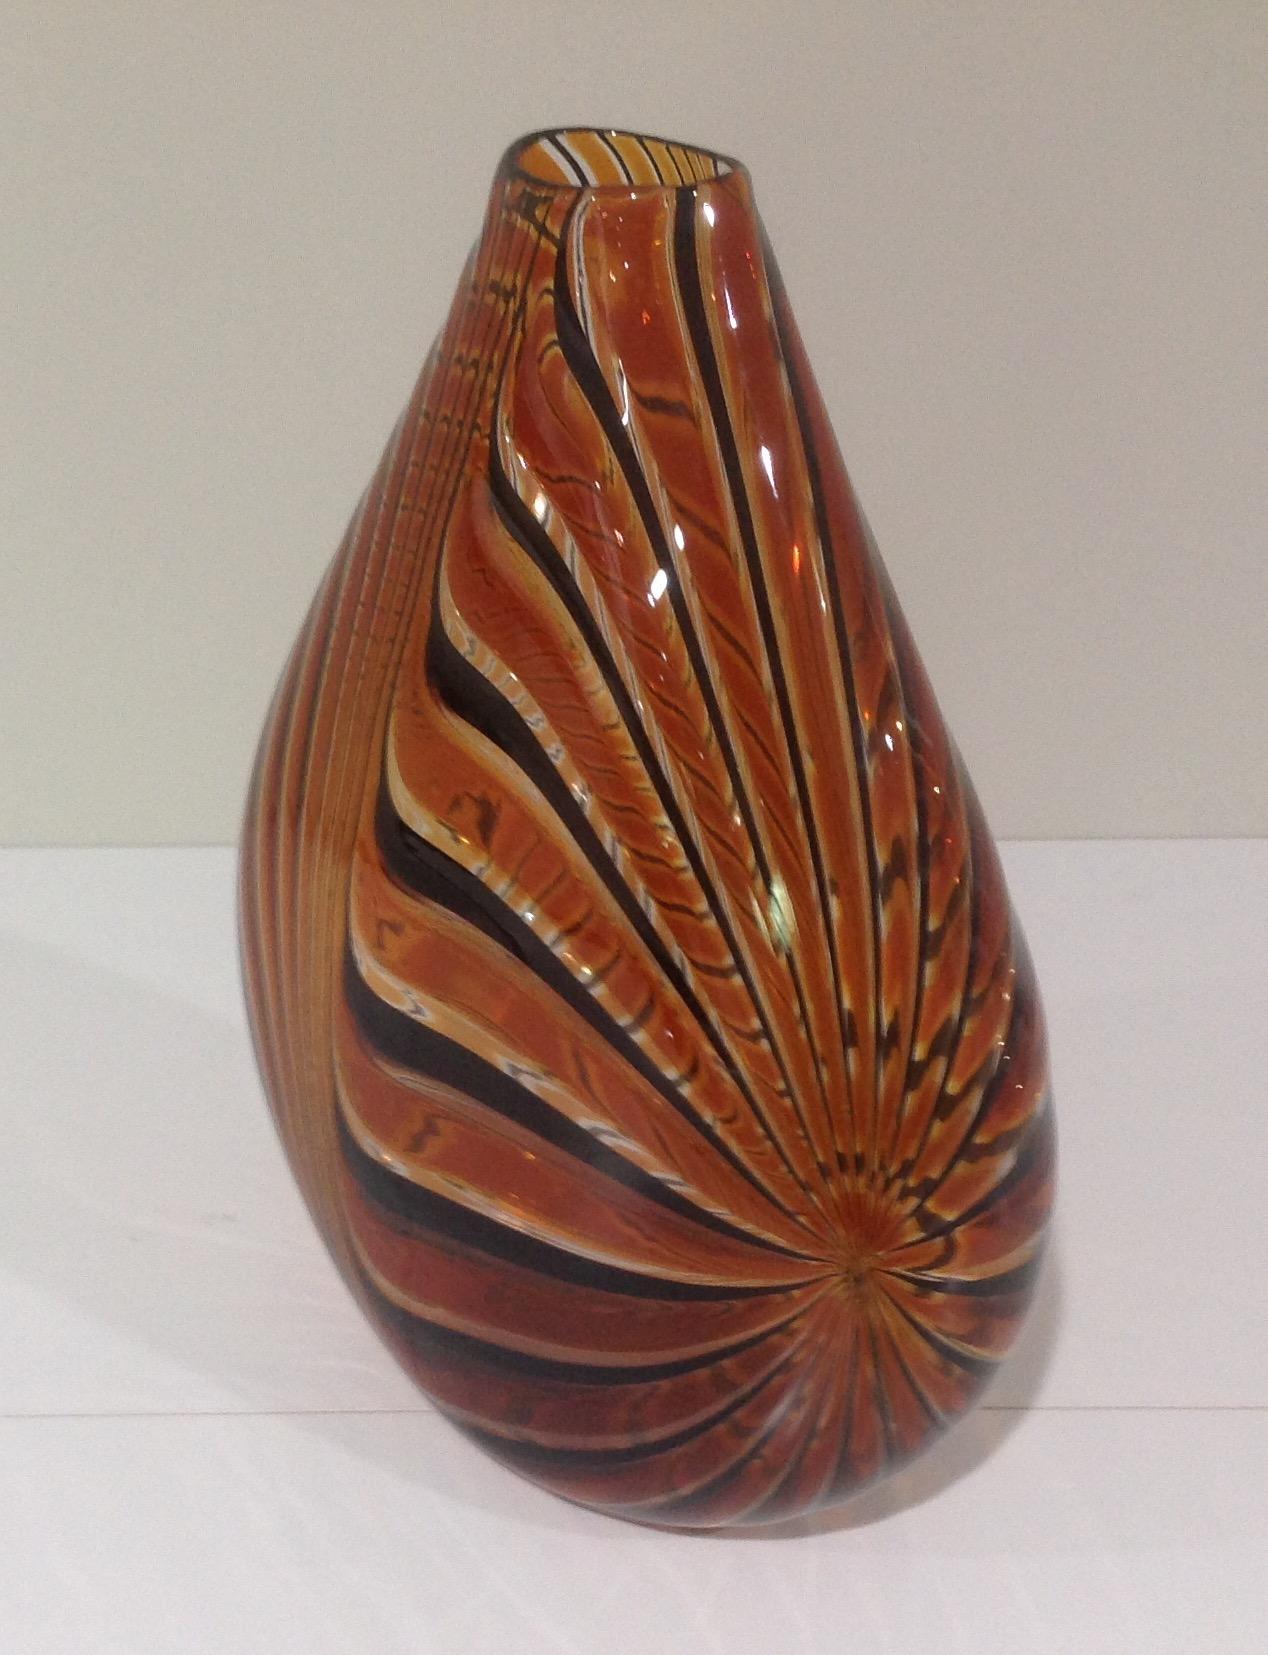 Amazing and technical signed spiral decoration vase by Master glass blower Orlando Zennaro.